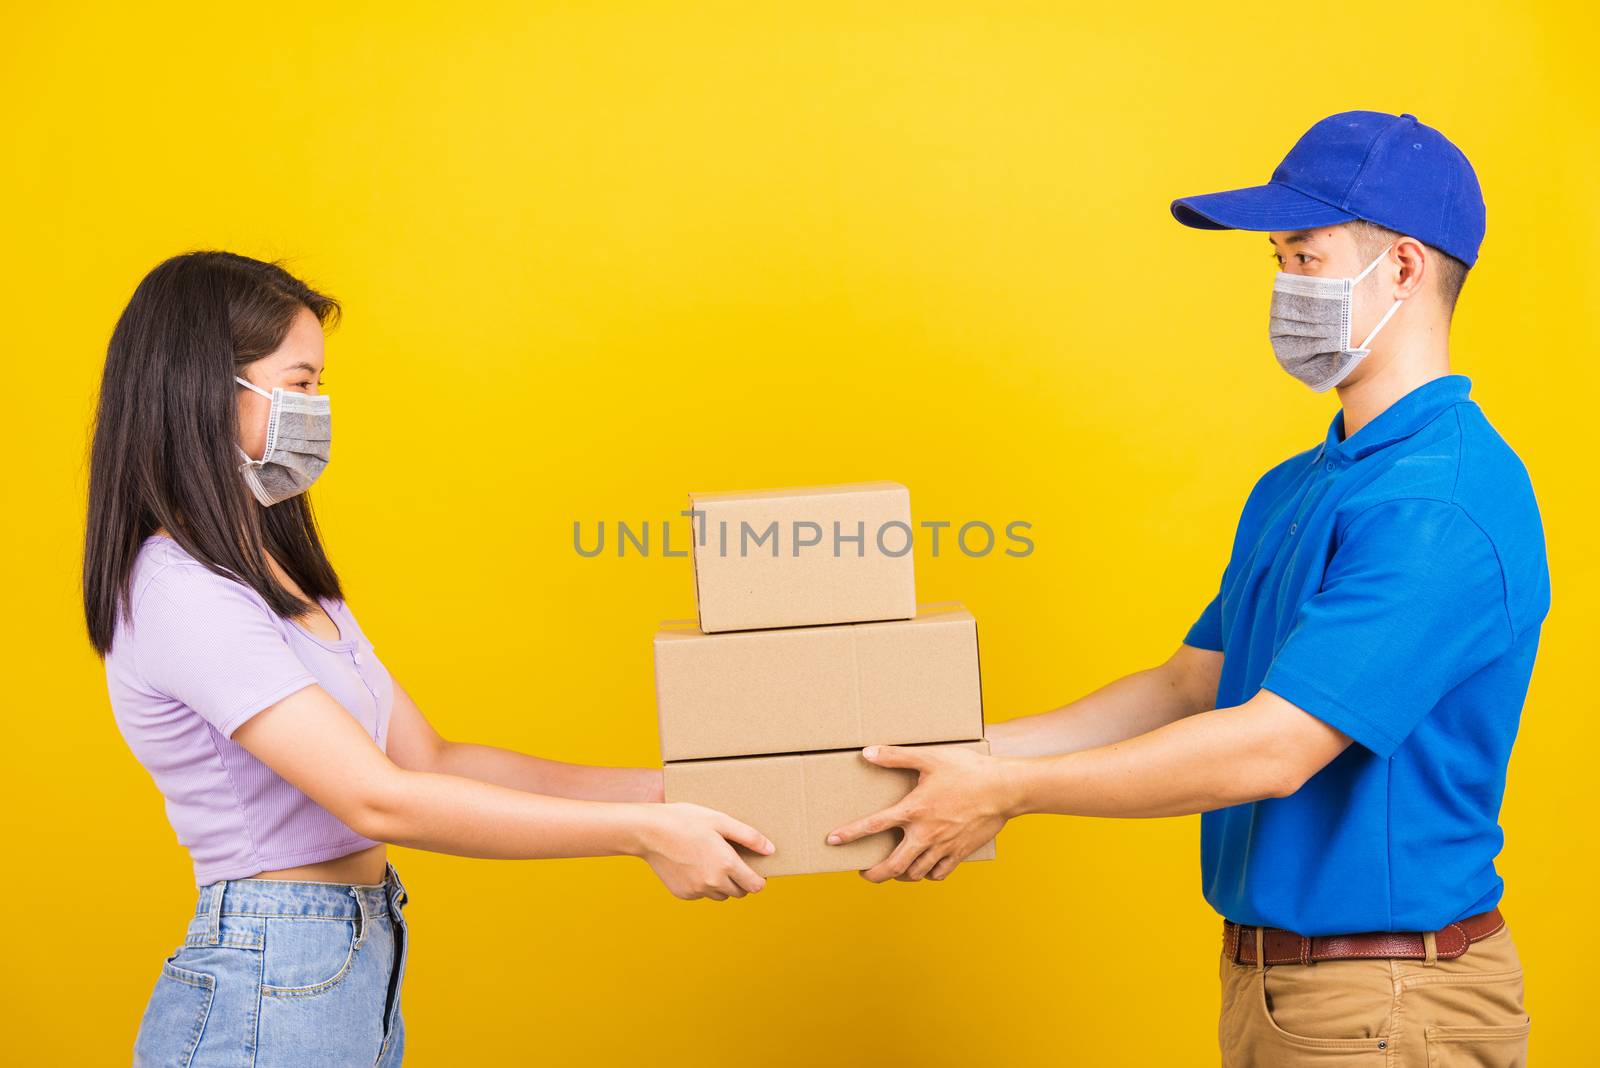 Asian beautiful woman and handsome man wearing protection face mask against coronavirus, accepting delivery boxes, studio shot isolated on yellow background, COVID-19 or corona virus concept